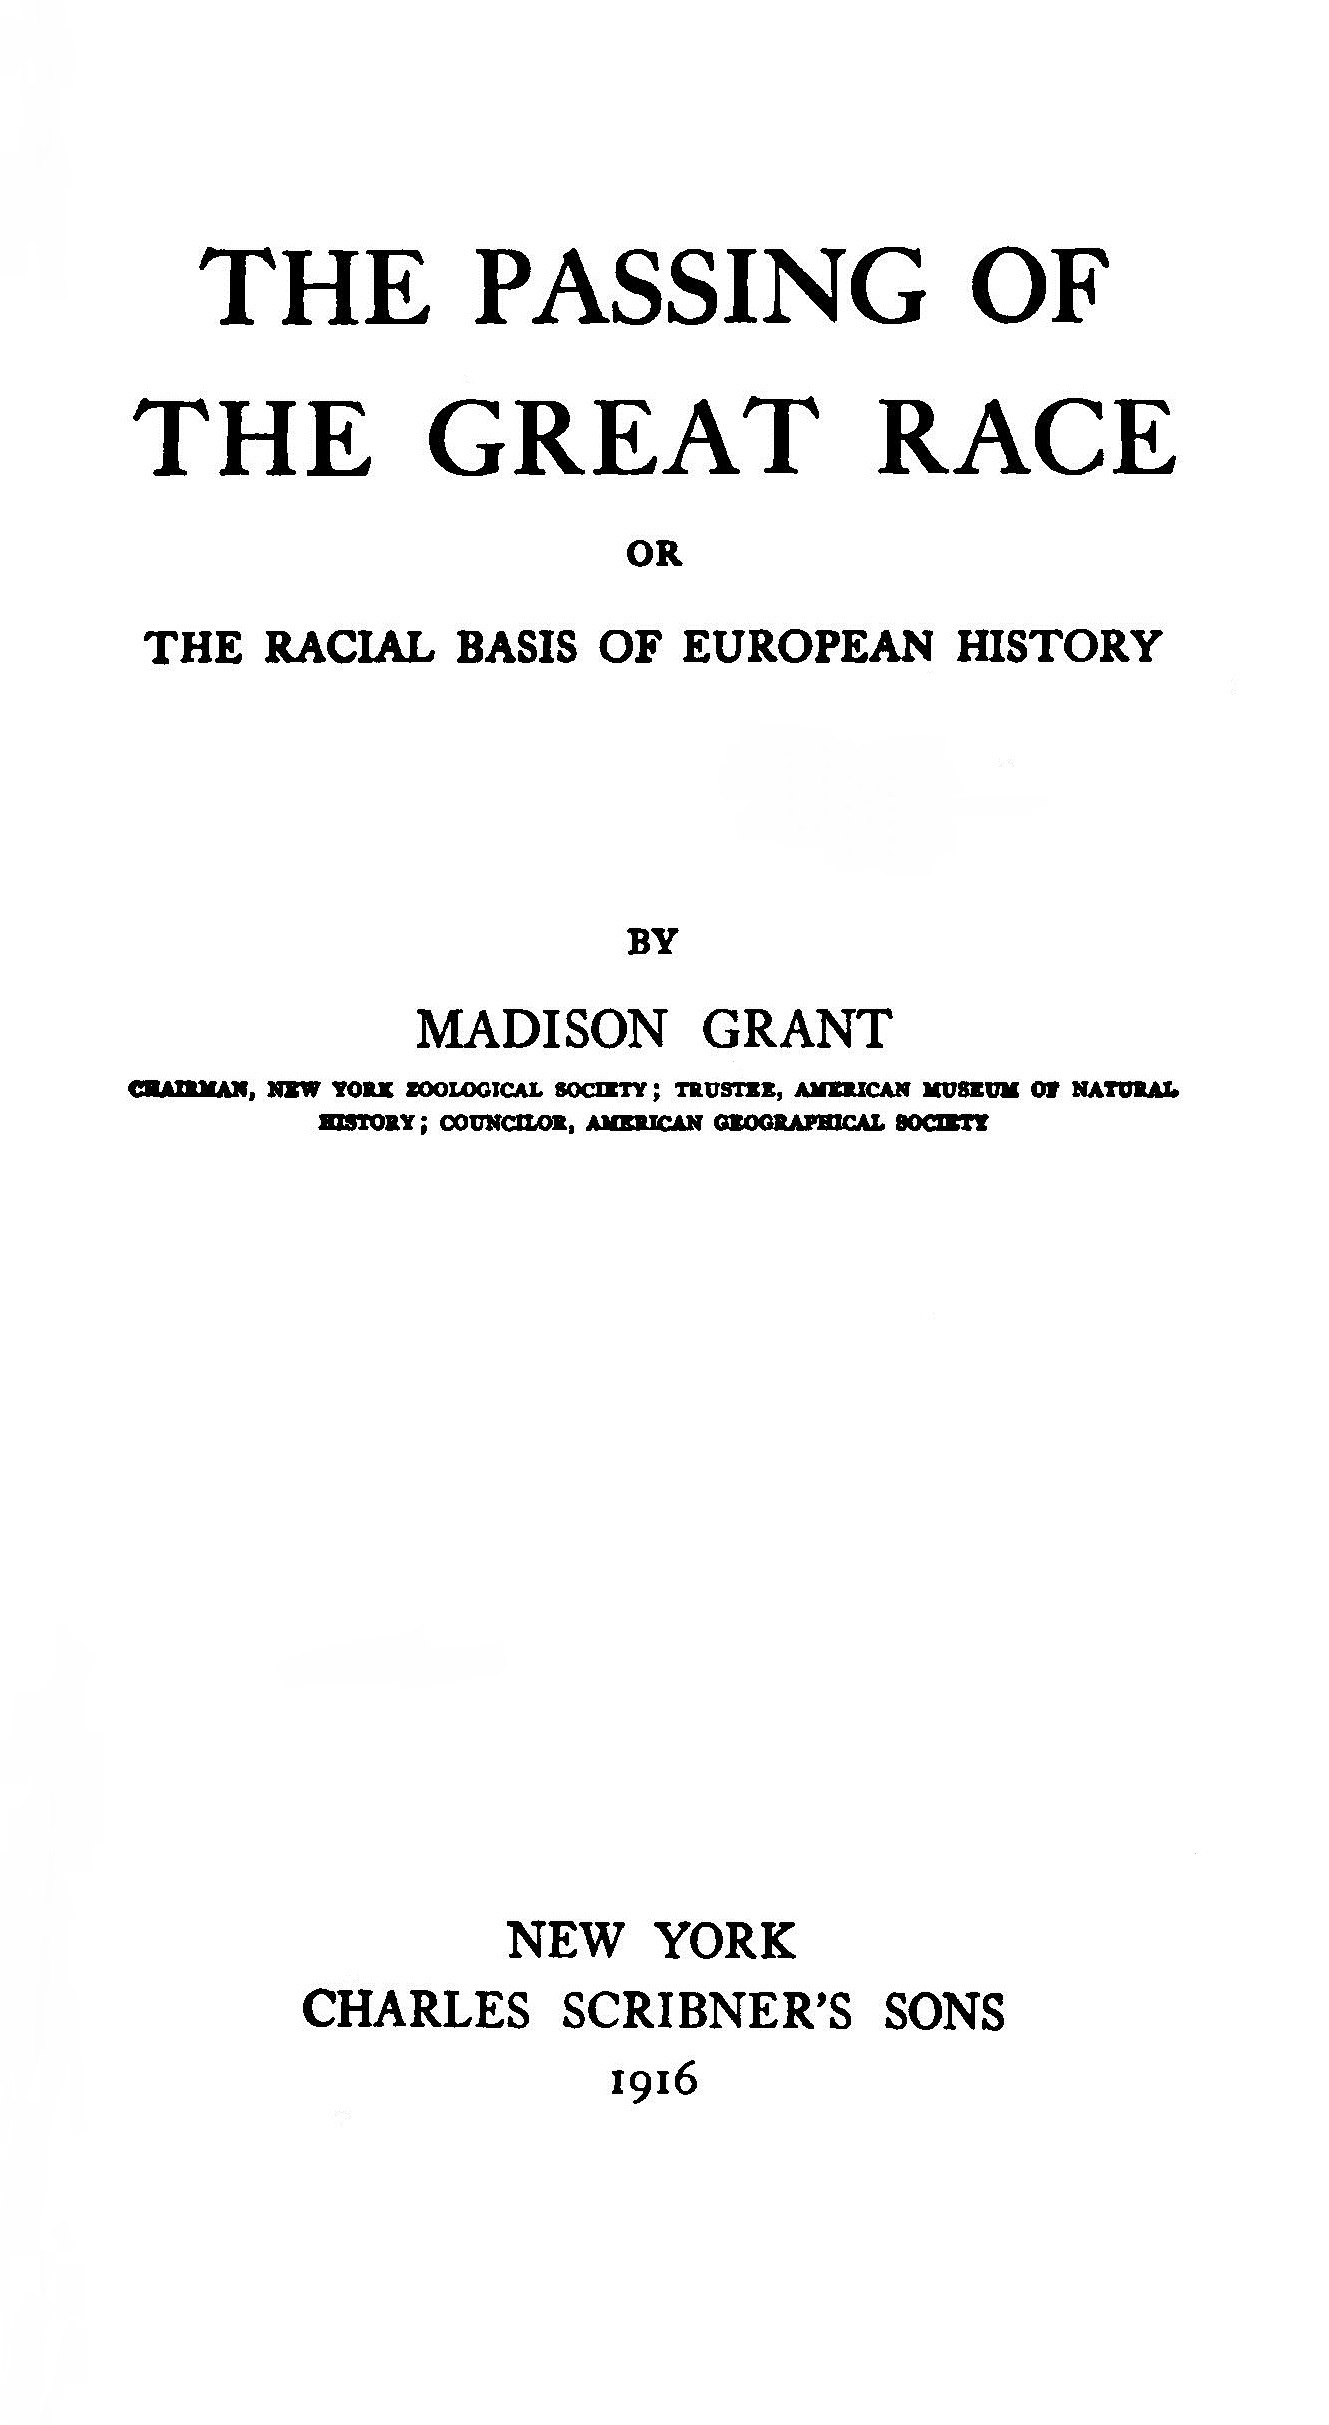 Title Page of The Passing of the Great Race